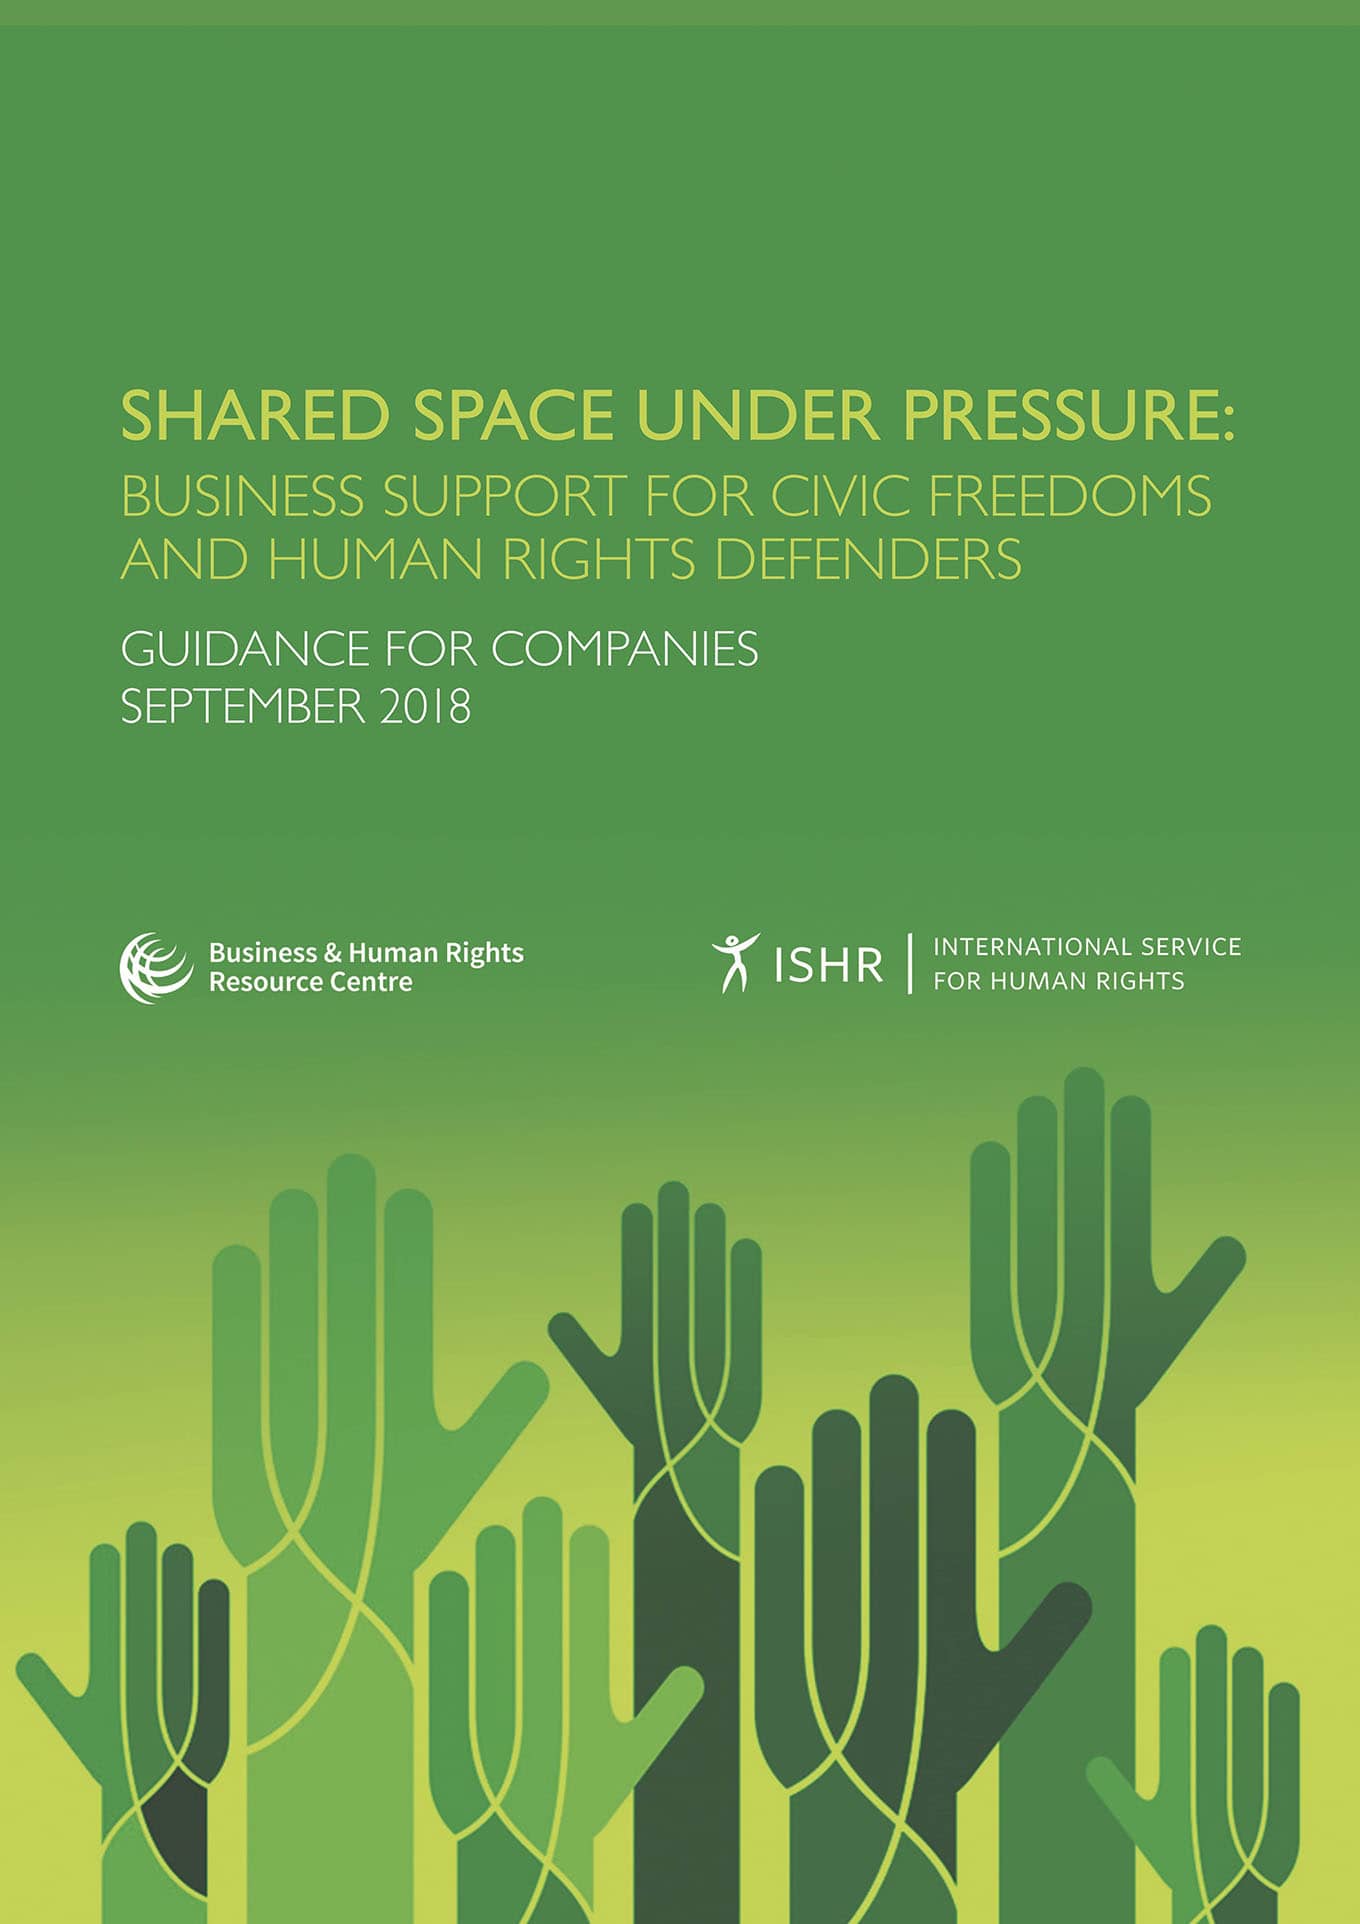 Shared Space Under Pressure: Business Support for Civic Freedoms and Human Rights Defenders (BHRRC & ISHR, 2018)